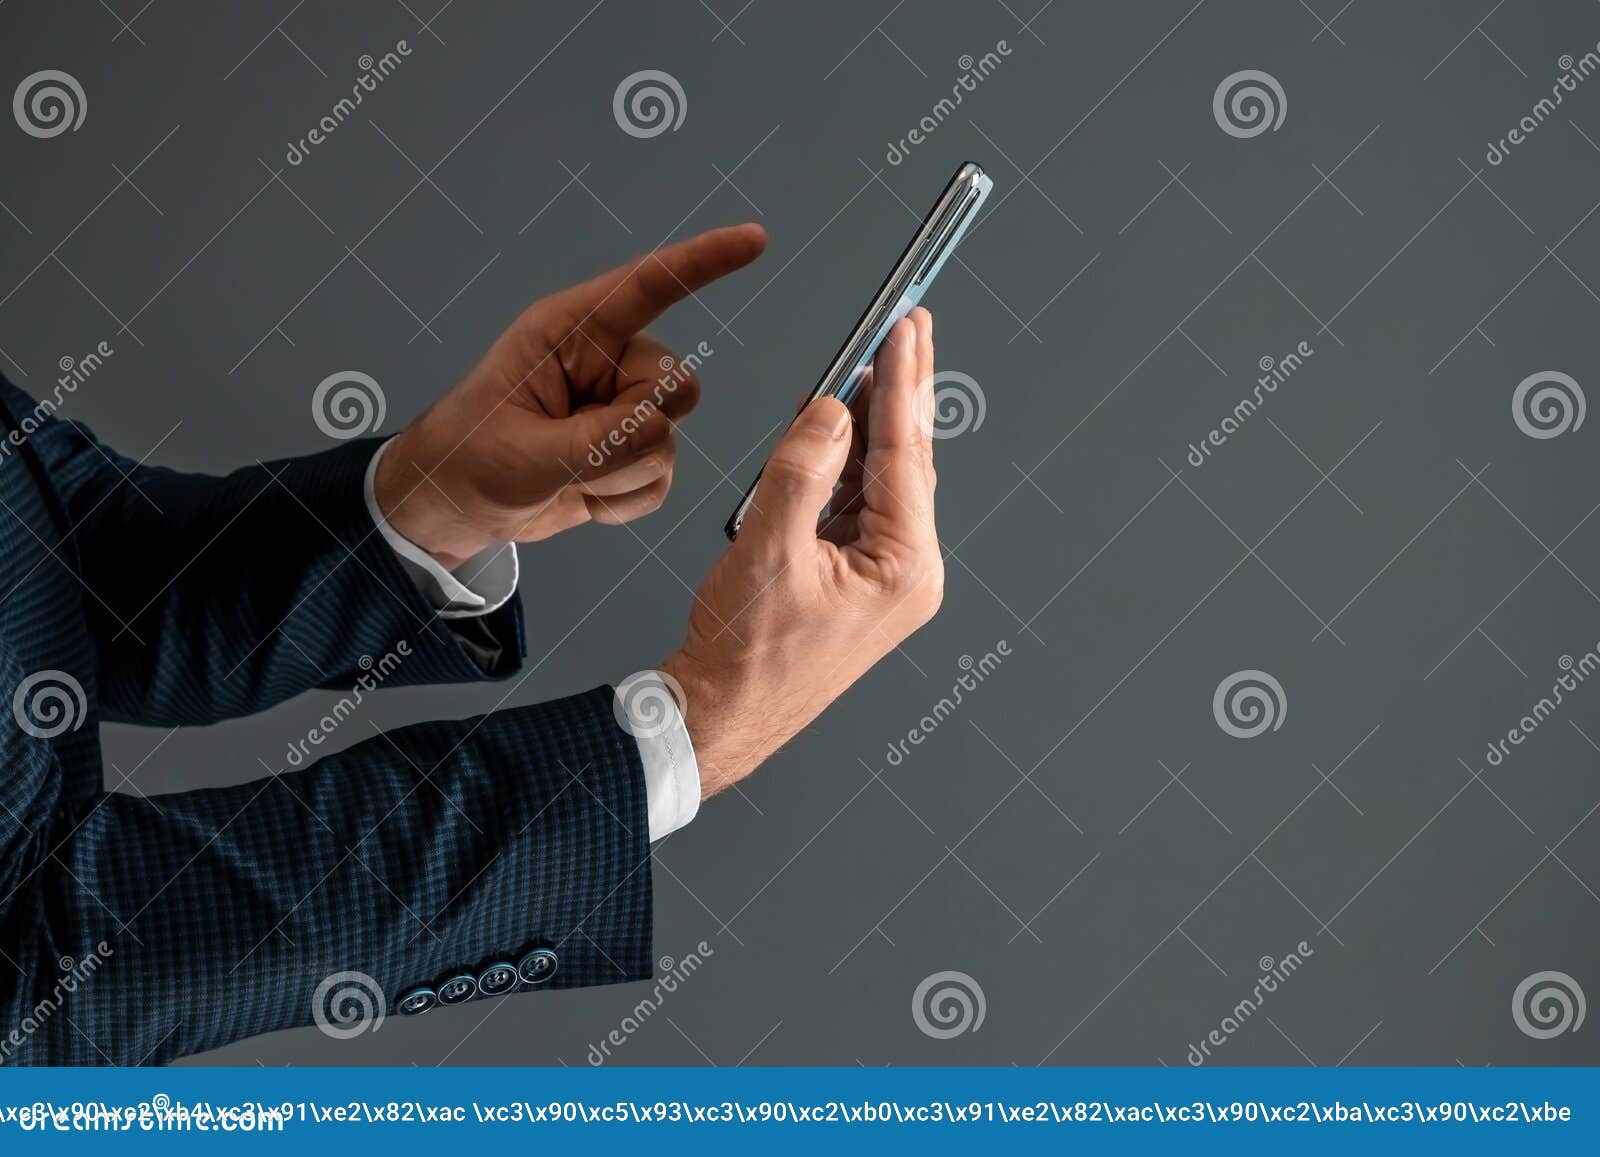 Hands of a Businessman in a Business Suit Holds a Smartphone ...